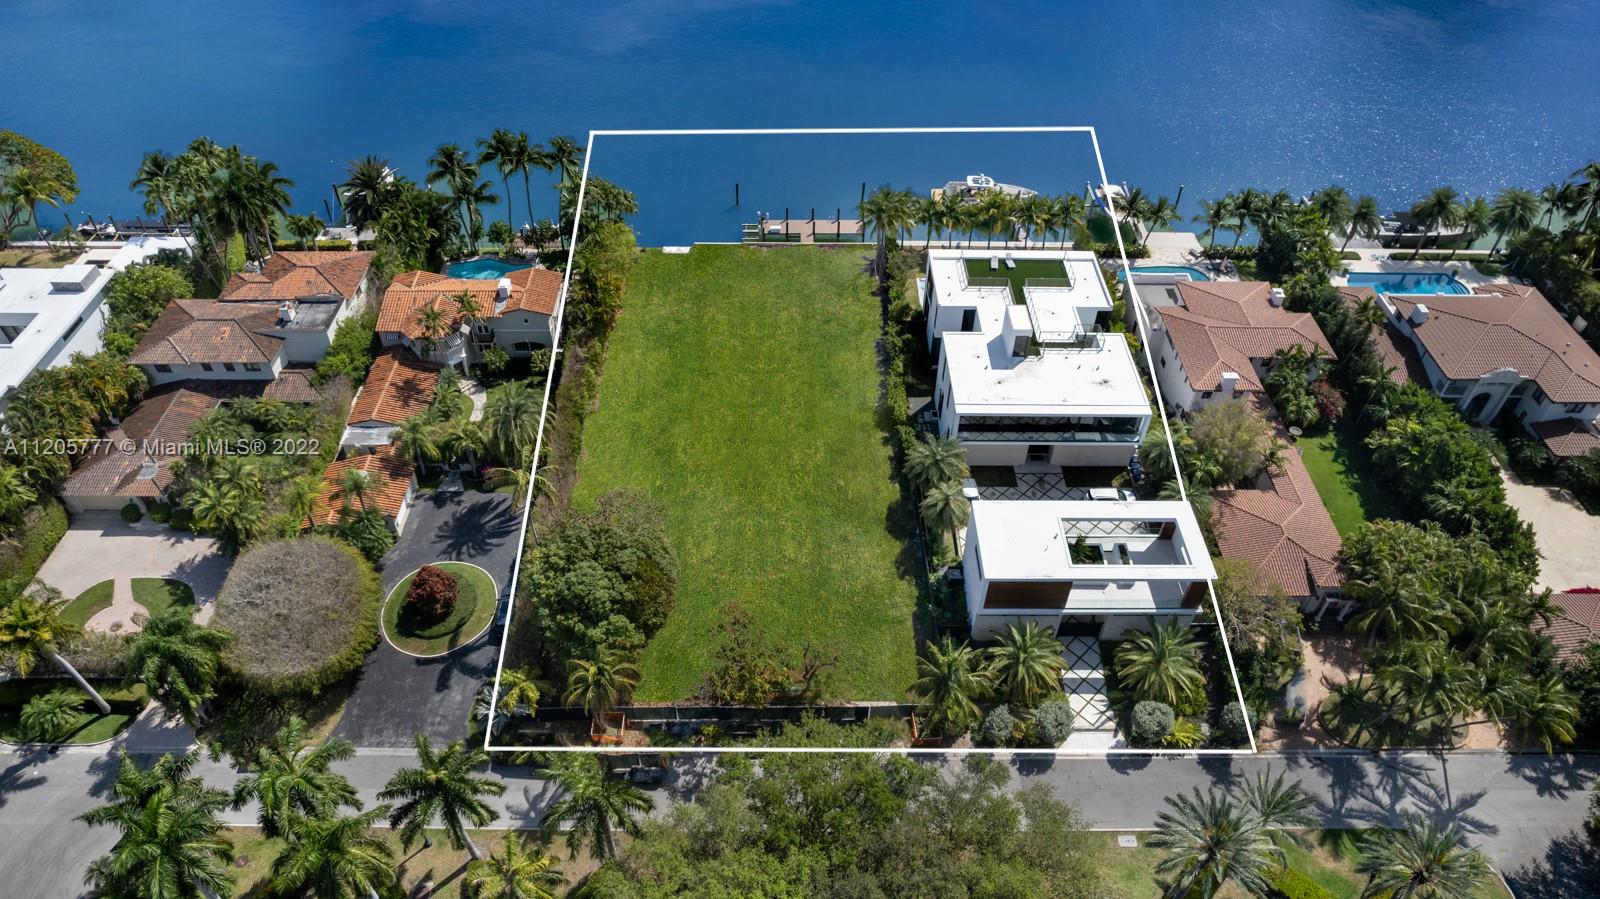 Step Inside With Me! Own a COMPOUND on gated Allison Island. Combined for an unheard of 37,800 SF of land with 175 FT of water frontage. The opportunities are endless - enjoy the year 2020, 8,800SF modern home and build a mirroring guest house with tennis court (in permit), construct a second home, or keep the green grass as is to enjoy having no neighbor. Situated well within this exclusive community of only 49 homes - all of which are waterfront- the Eastern exposure brings majestic sunrises, ocean breezes and calm waters for your boat. Available separately at $19,900,000 for 6493 Allison and $10,900,000 for 6505 Allison, there is clear value in the package purchase. Priced correctly in a sea of overpriced properties, this is unlike any other Miami Beach offering.